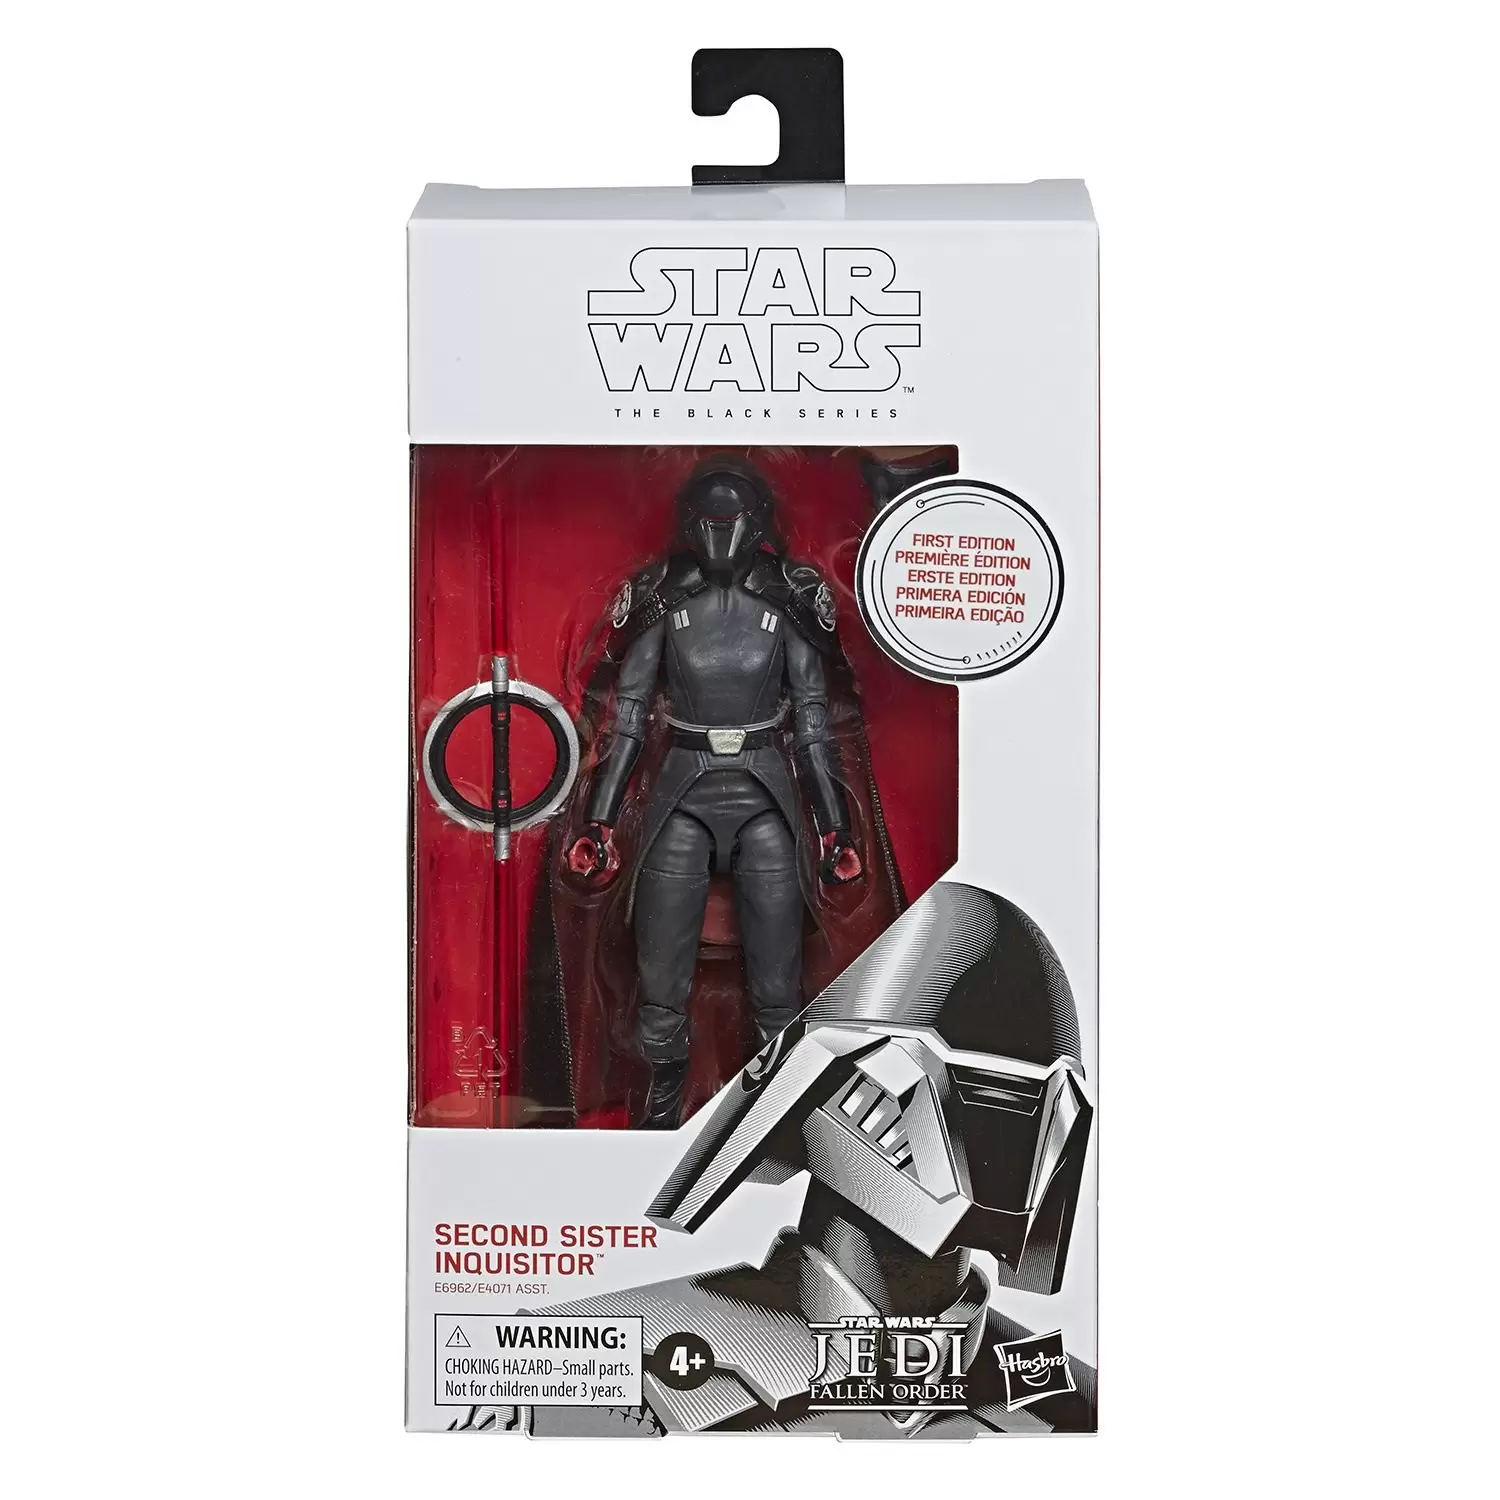 The Black Series - First Edition - Second Sister Inquisitor